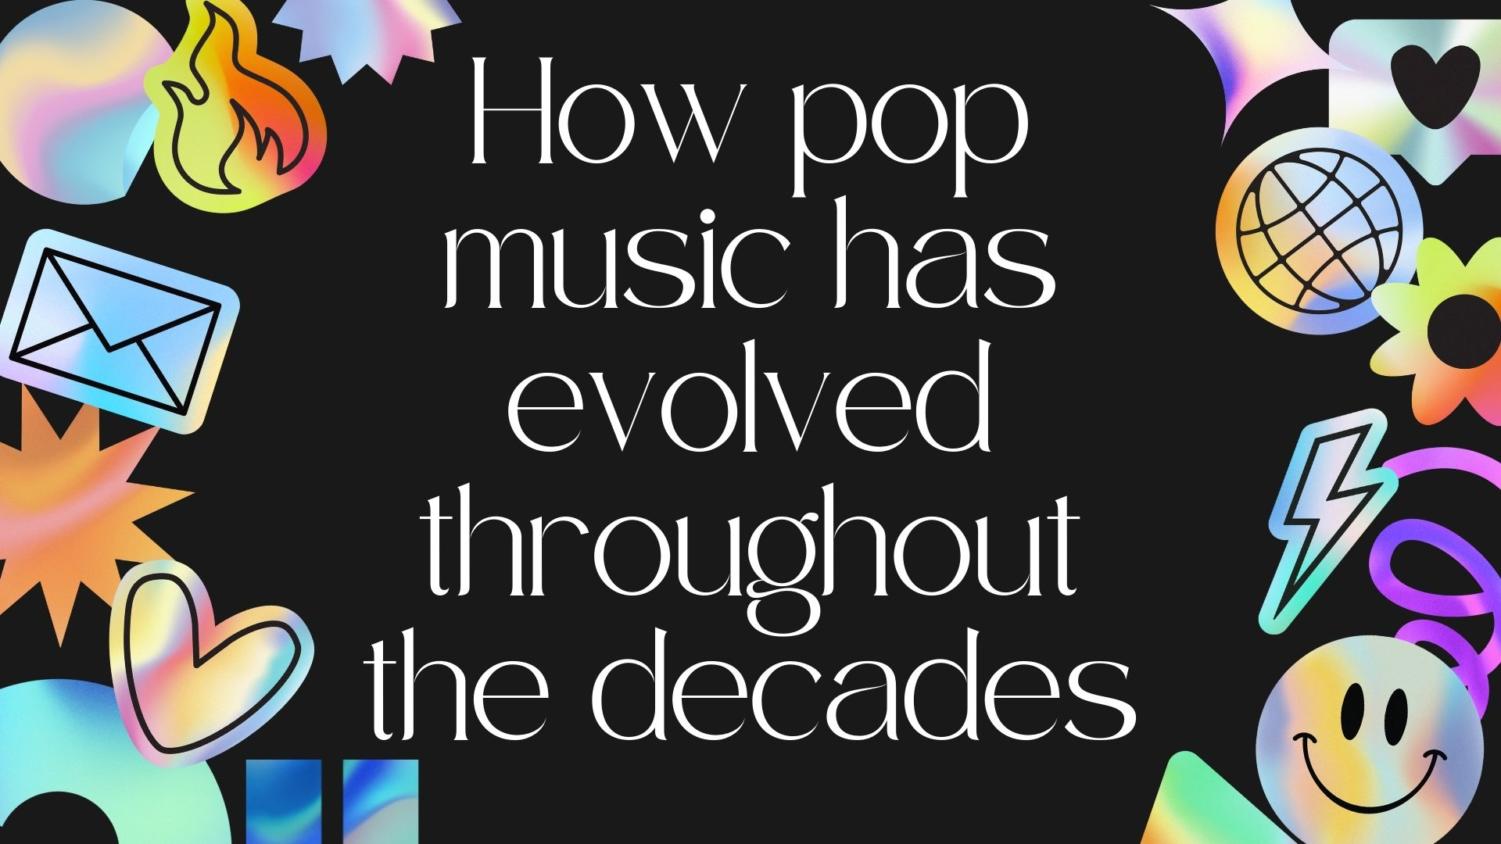 https://thecougarstar.com/wp-content/uploads/2021/12/how-pop-music-has-evolved-throughout-the-decades.jpg